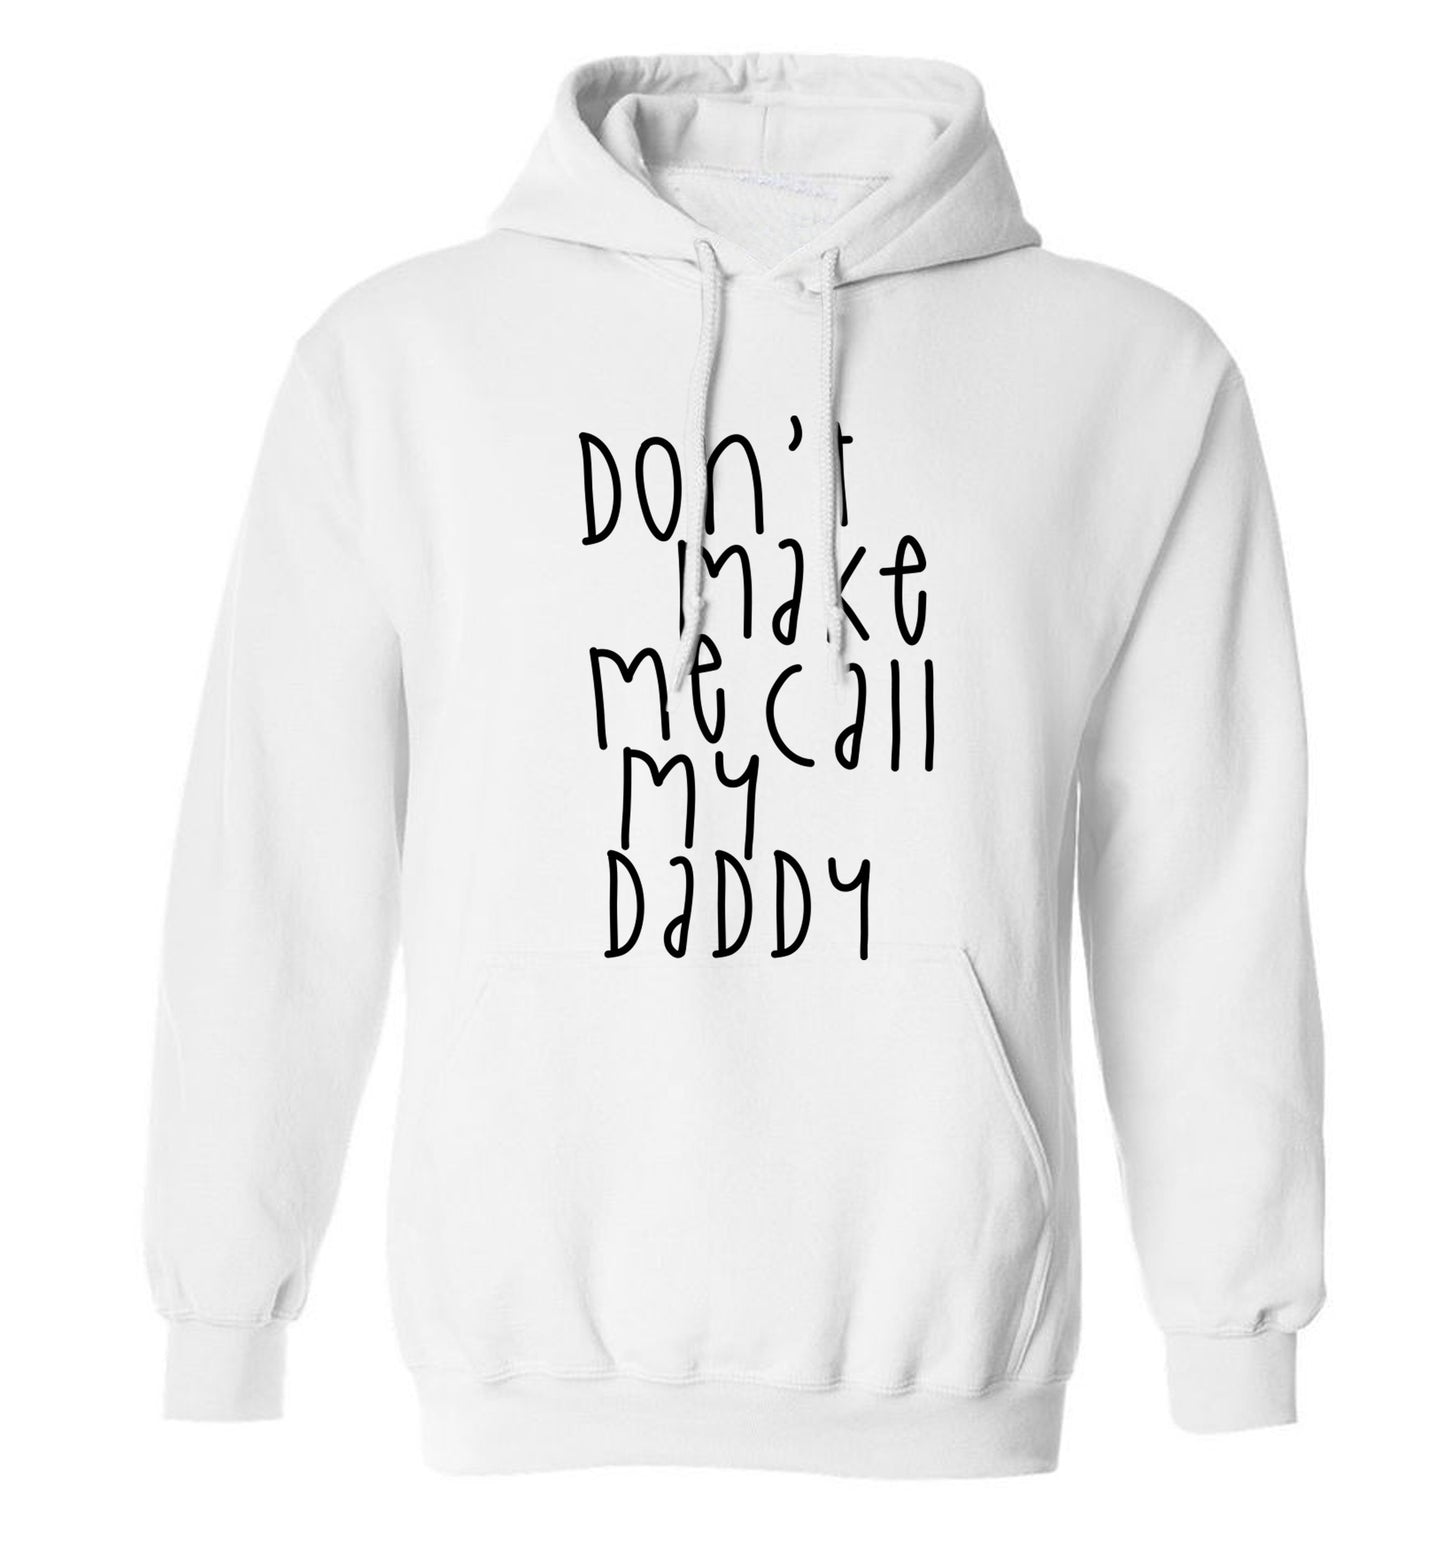 Don't make me call my daddy adults unisex white hoodie 2XL